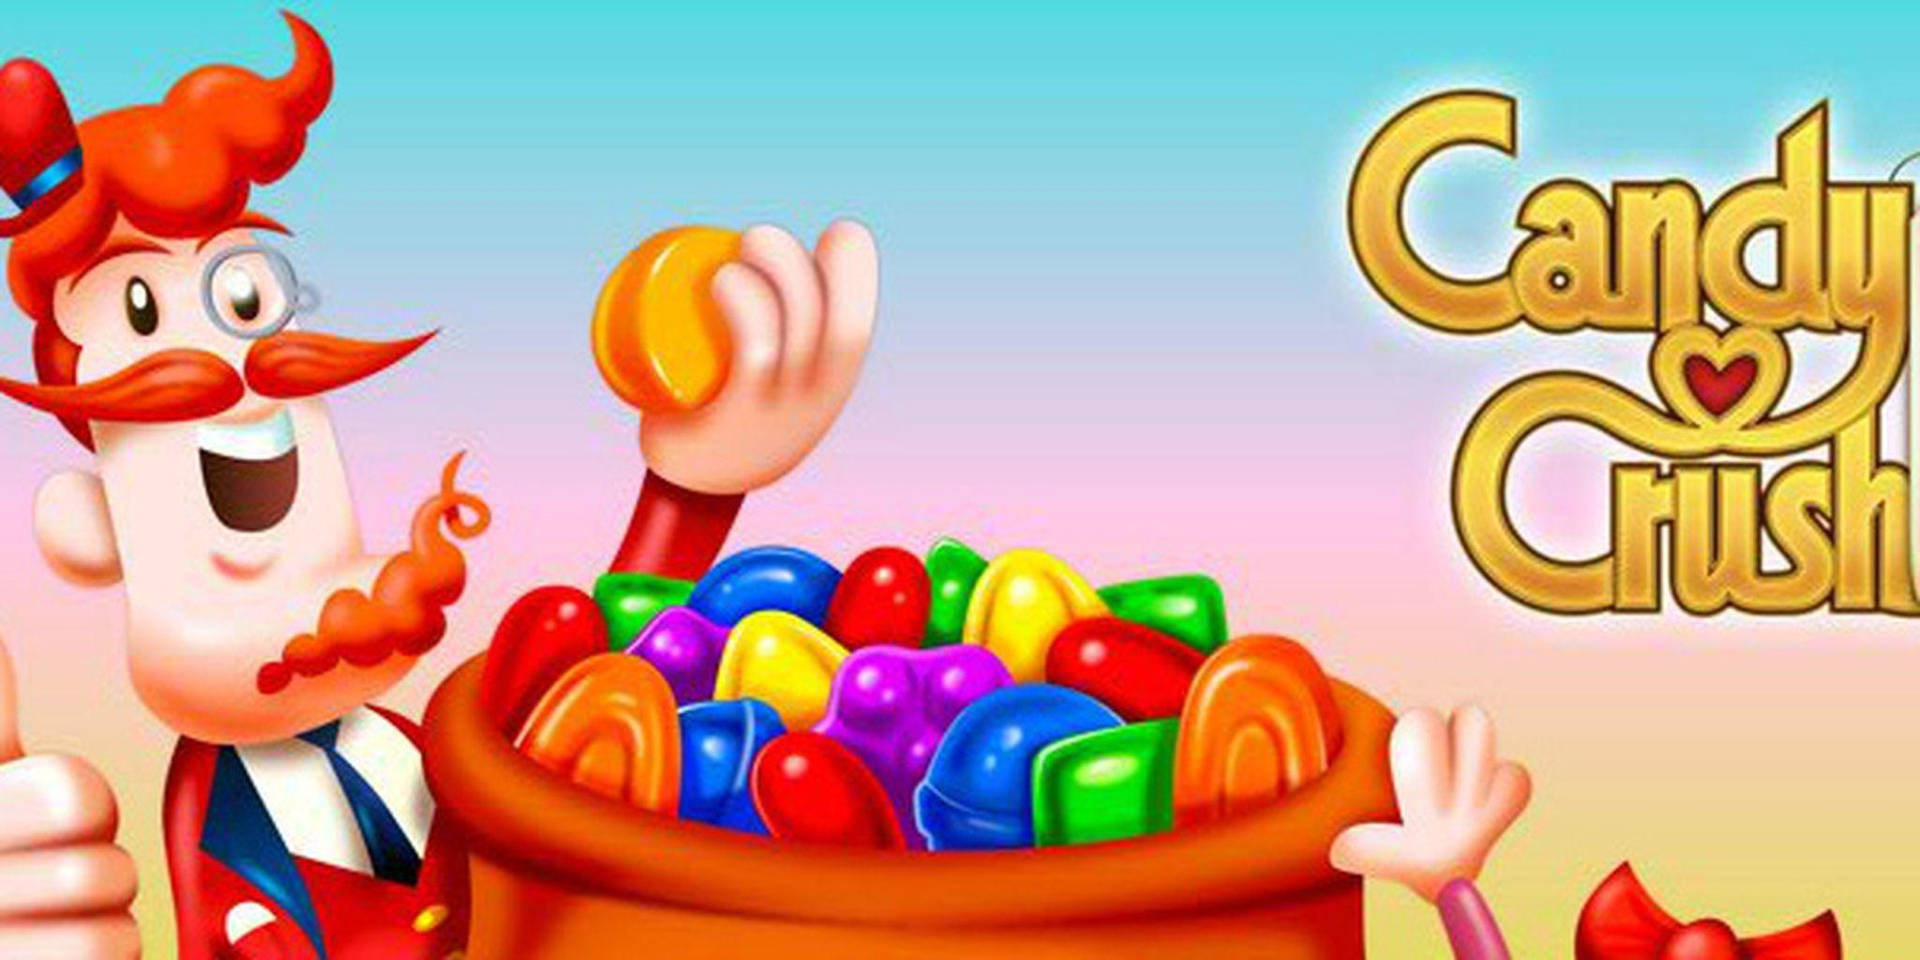 Mr. Toffee From Candy Crush Saga Wallpaper